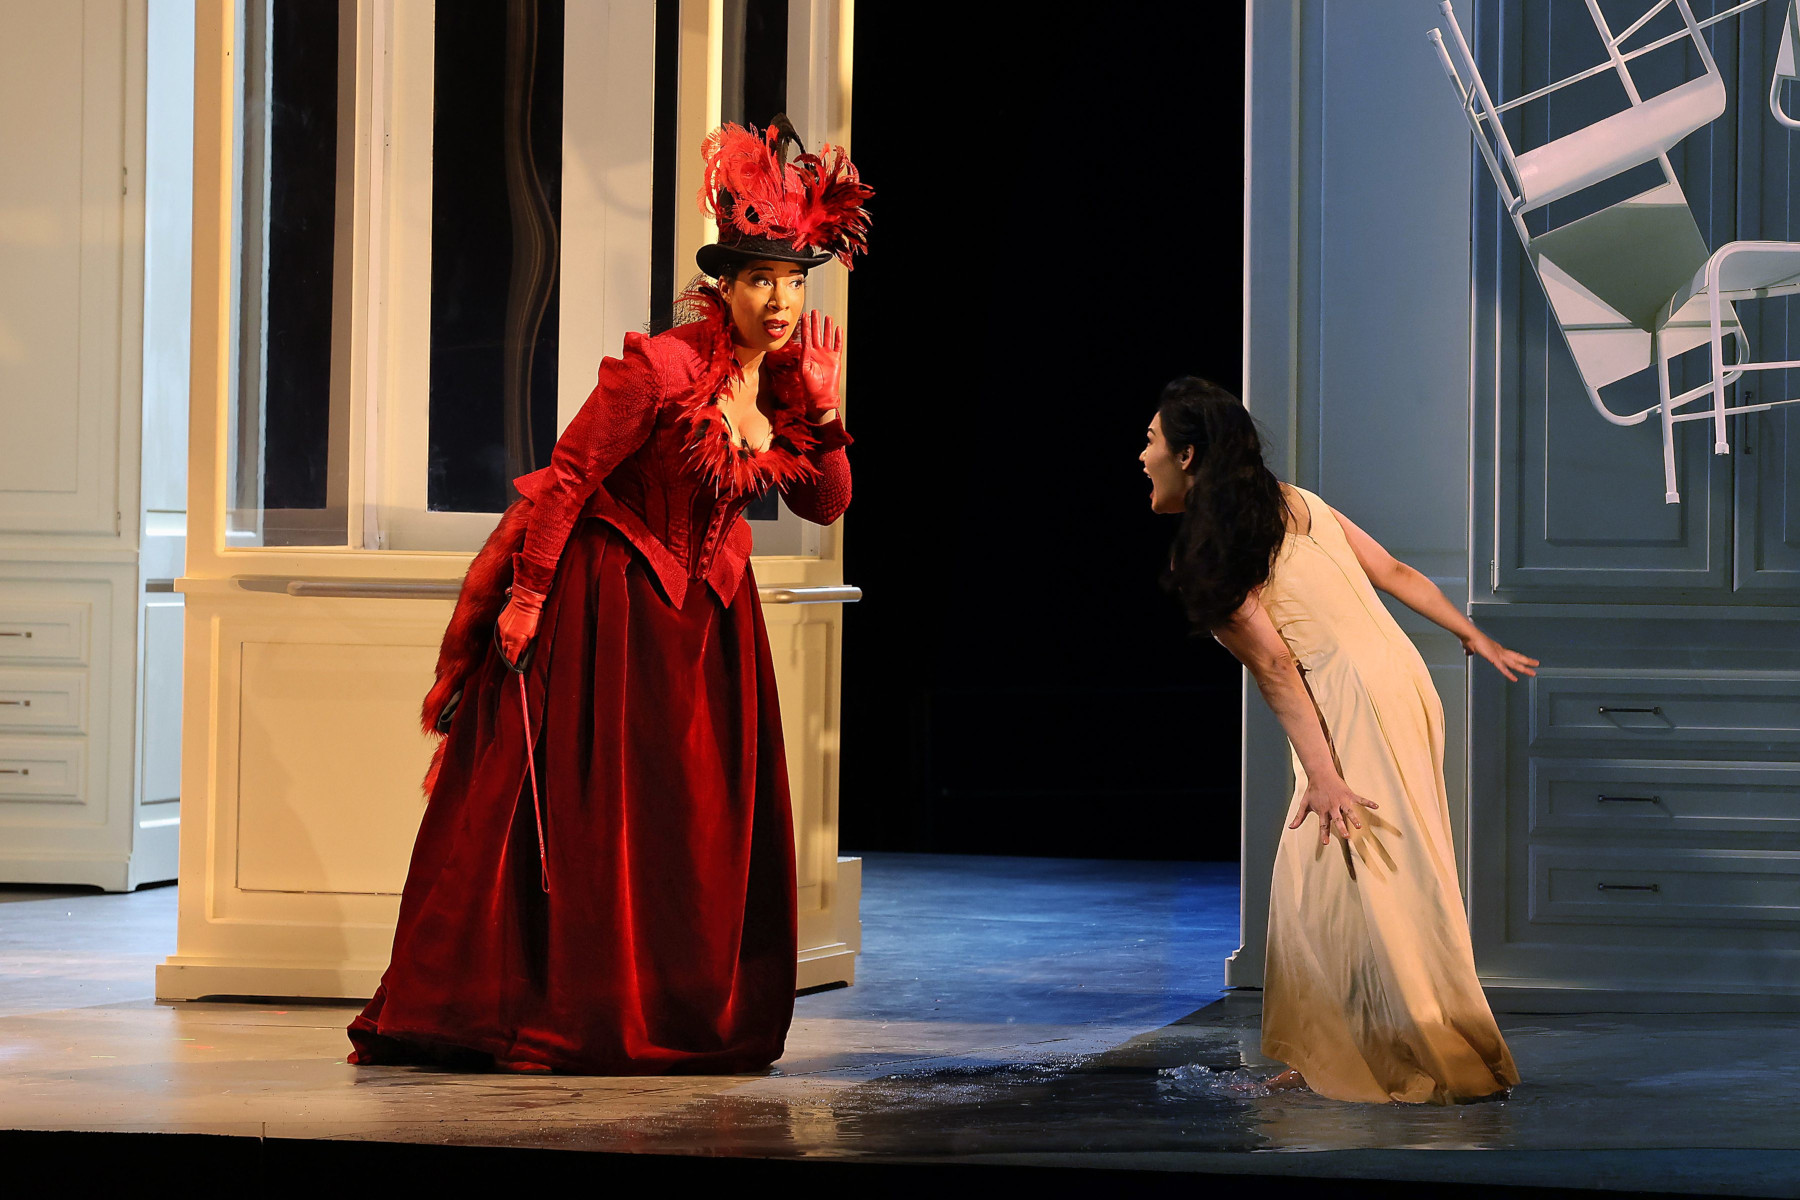 Left to Right; Mary Elizabeth Williams (Foreign Princess), Ailyn Pérez (Rusalka), photo by Curtis Brown for the Santa Fe Opera